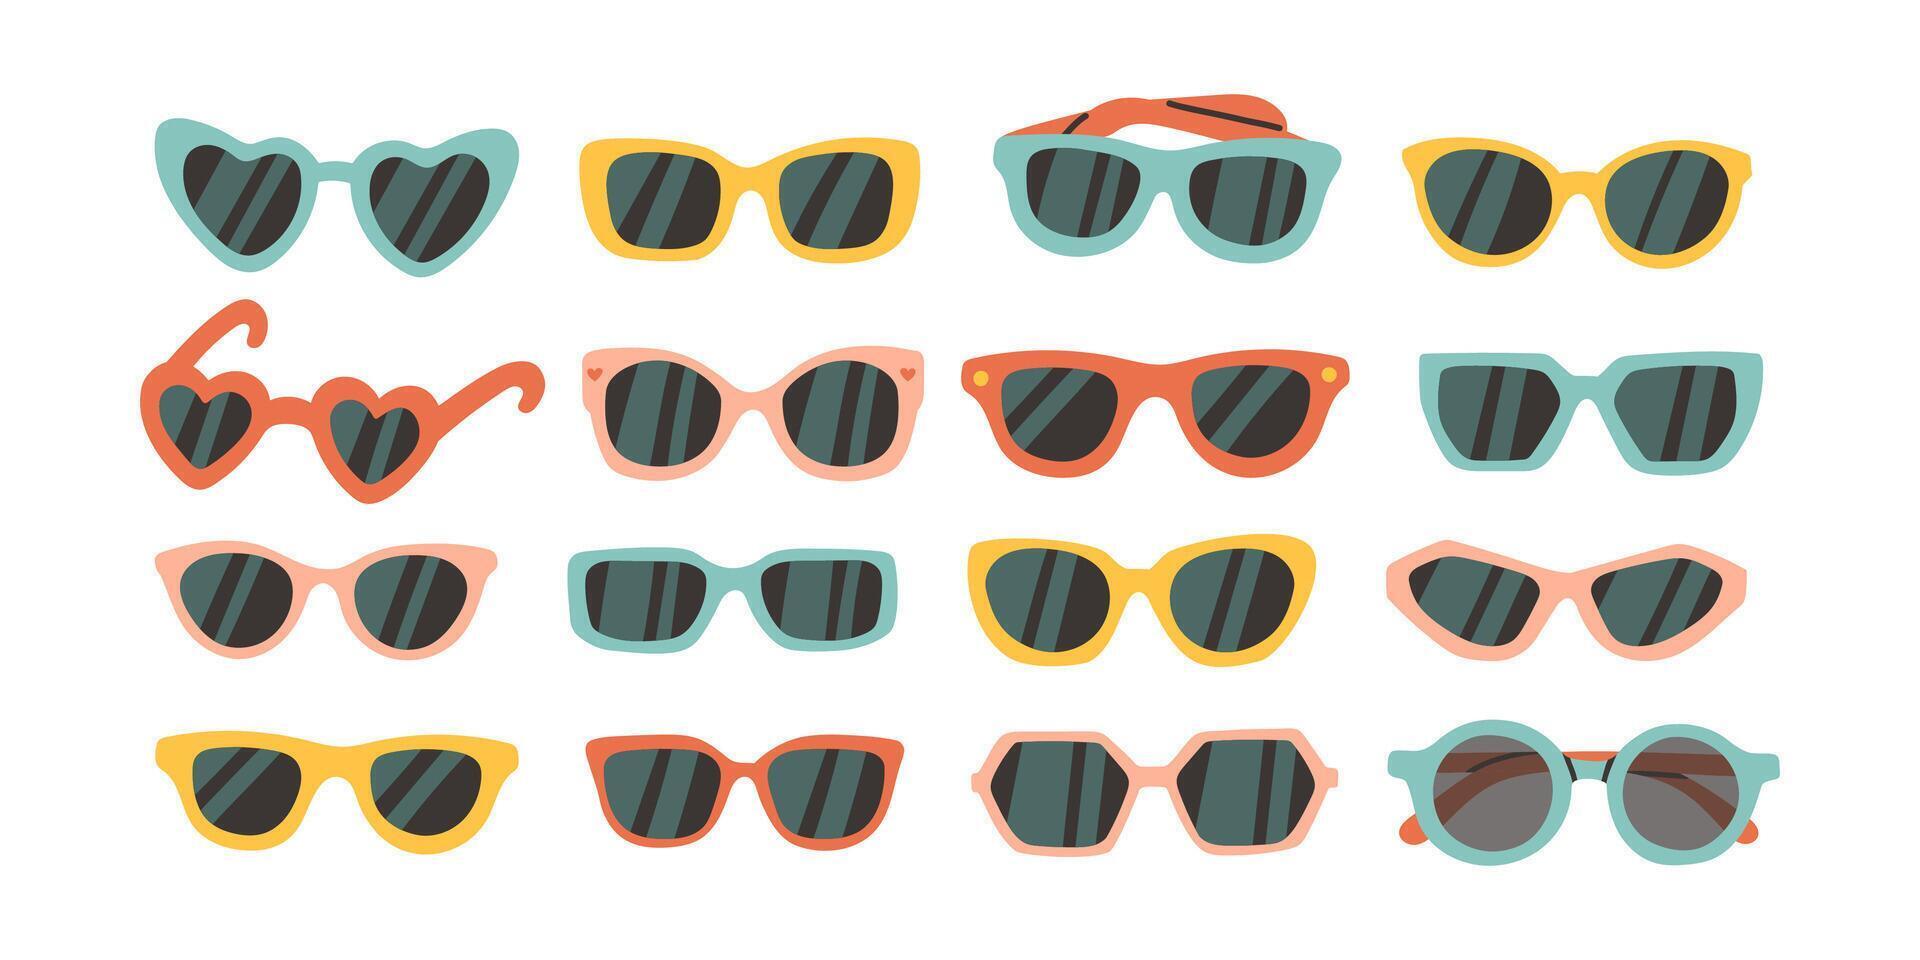 Various Sunglasses. Different shapes, colors. Plastic, metal frame. Hand drawn modern. Design elements set. Isolated objects. Summer fashion accessories, sun protection concept. vector